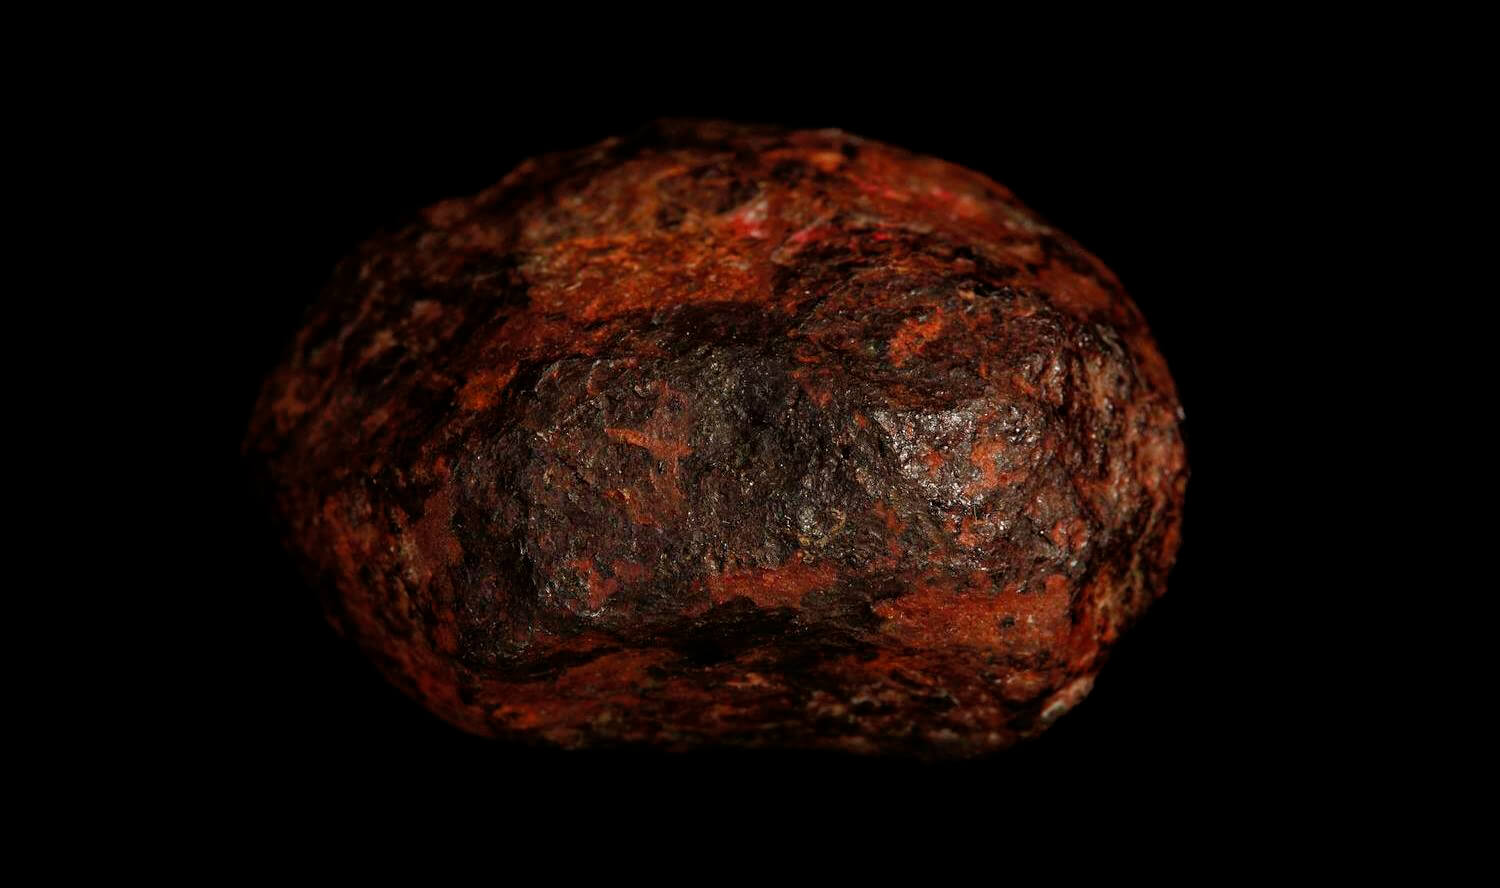 Inside the meteorite was discovered unknown in nature, the mineral